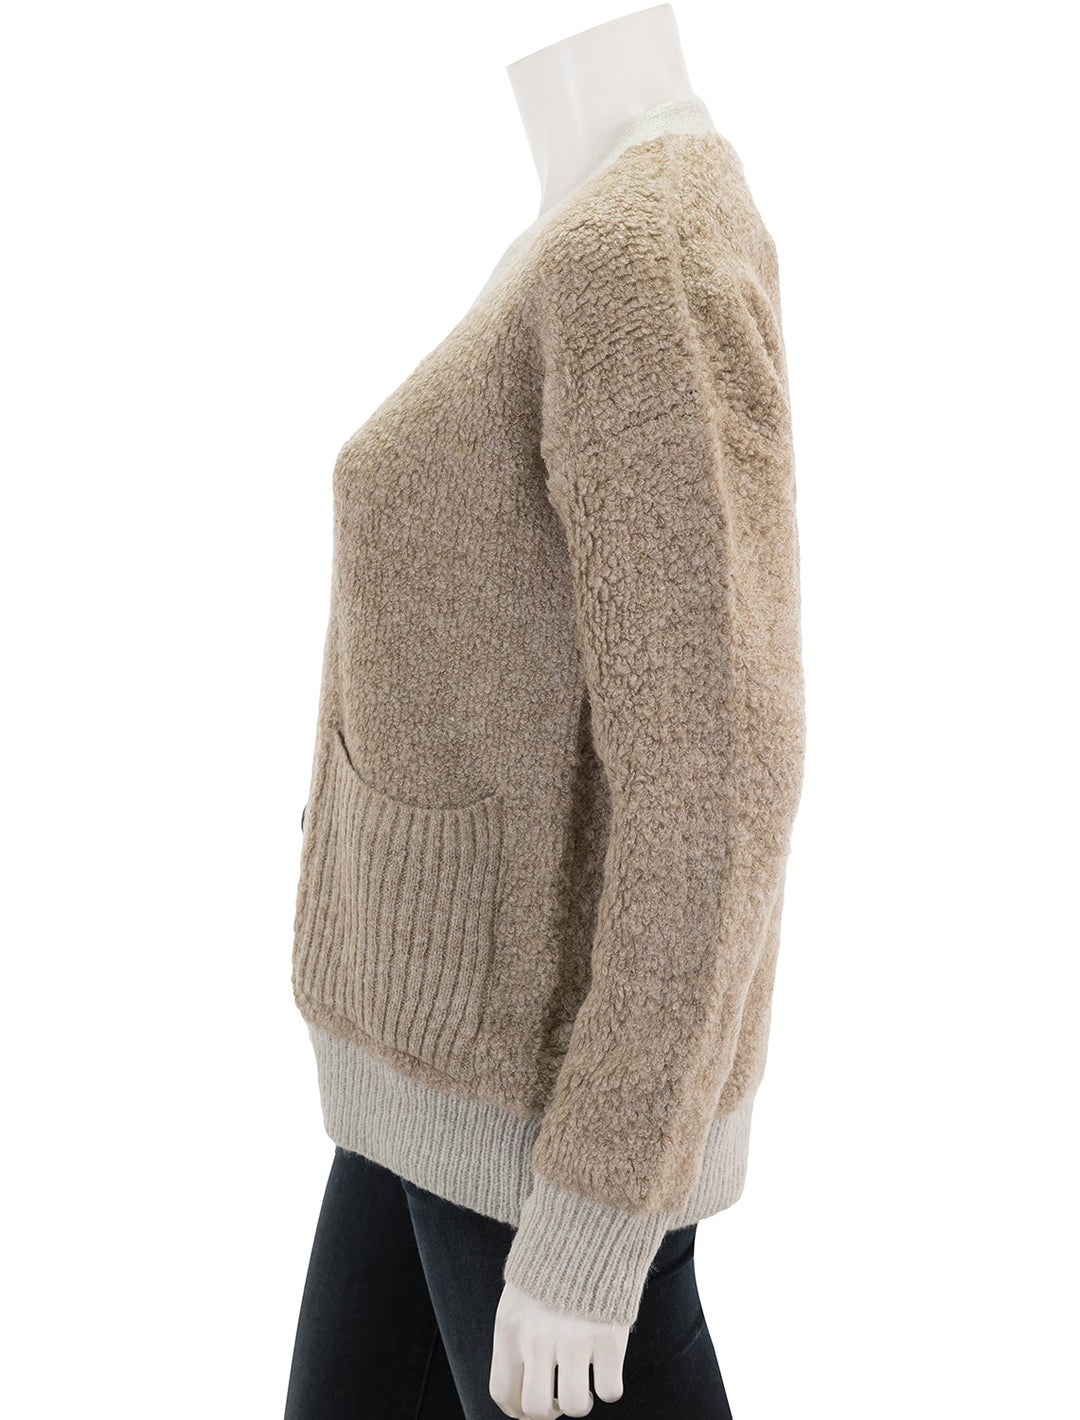 Side view of Line's Mina Cardigan in Latte.